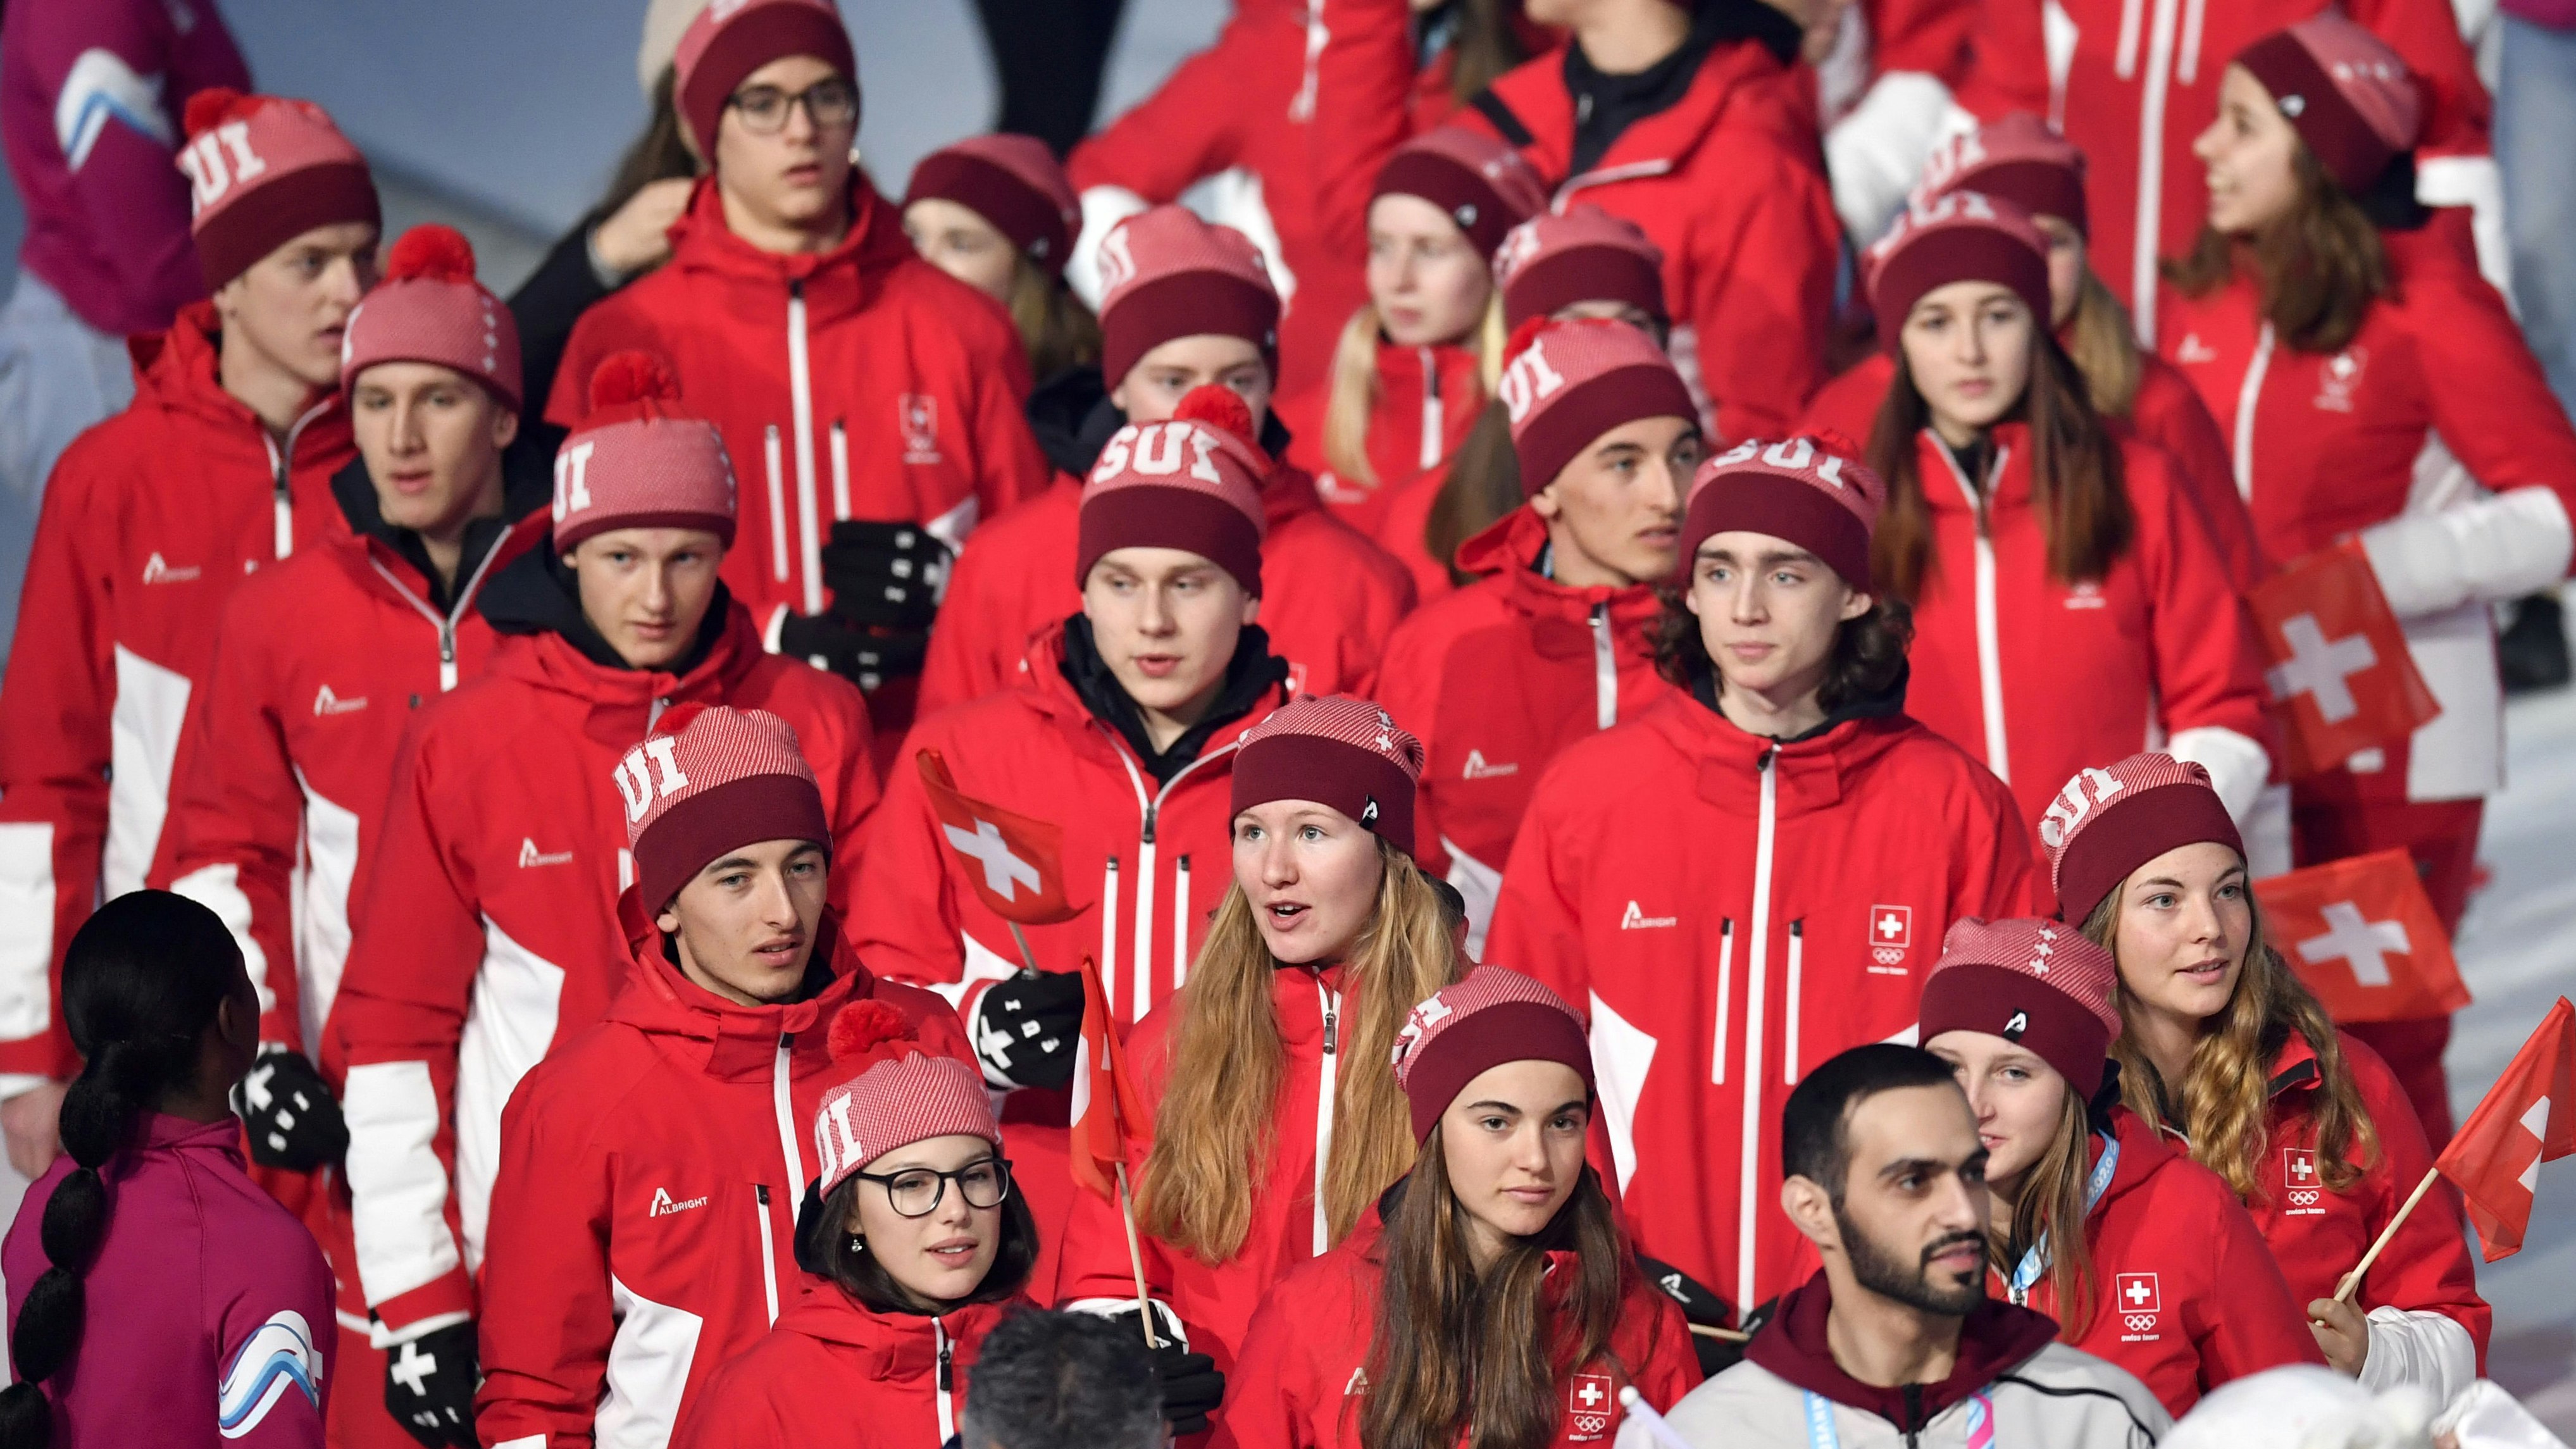 The Swiss athletes parade during the opening ceremony of the Lausanne 2020 Winter Youth Olympic Games at the Vaudoise Arena, in Lausanne, Switzerland, Thursday, January 9, 2020. The 3rd Winter Youth Olympic Games will take place in Lausanne from 9 to 22 January 2020. (KEYSTONE/Gabriel Monnet)